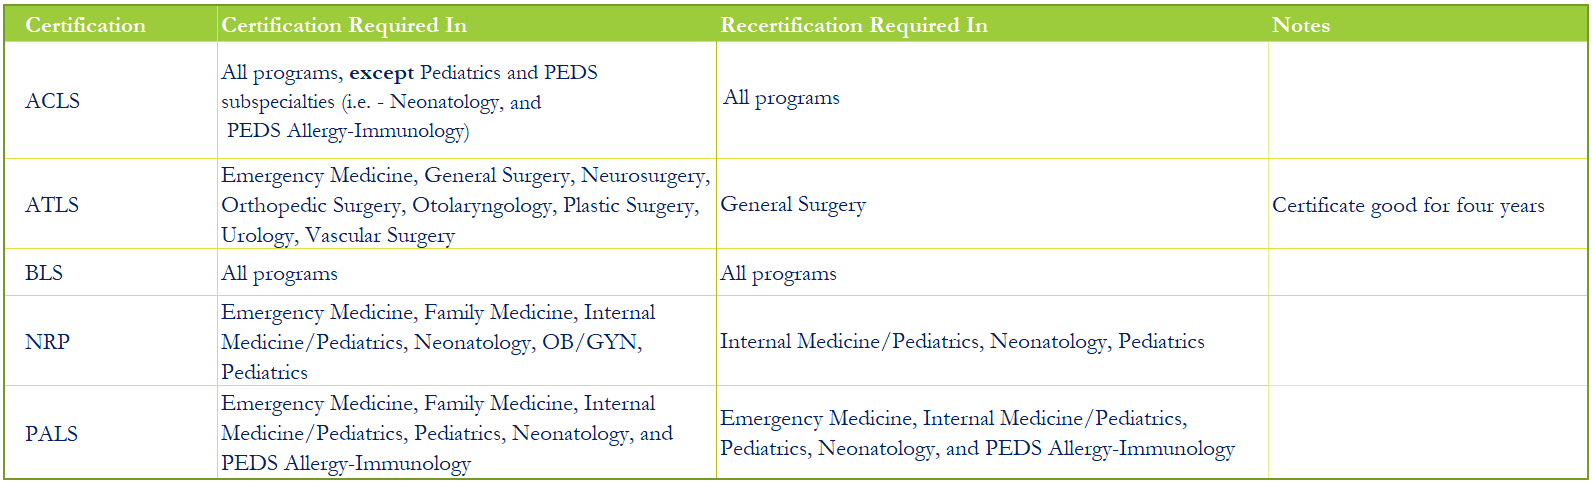 Table of Trainee Required Certifications